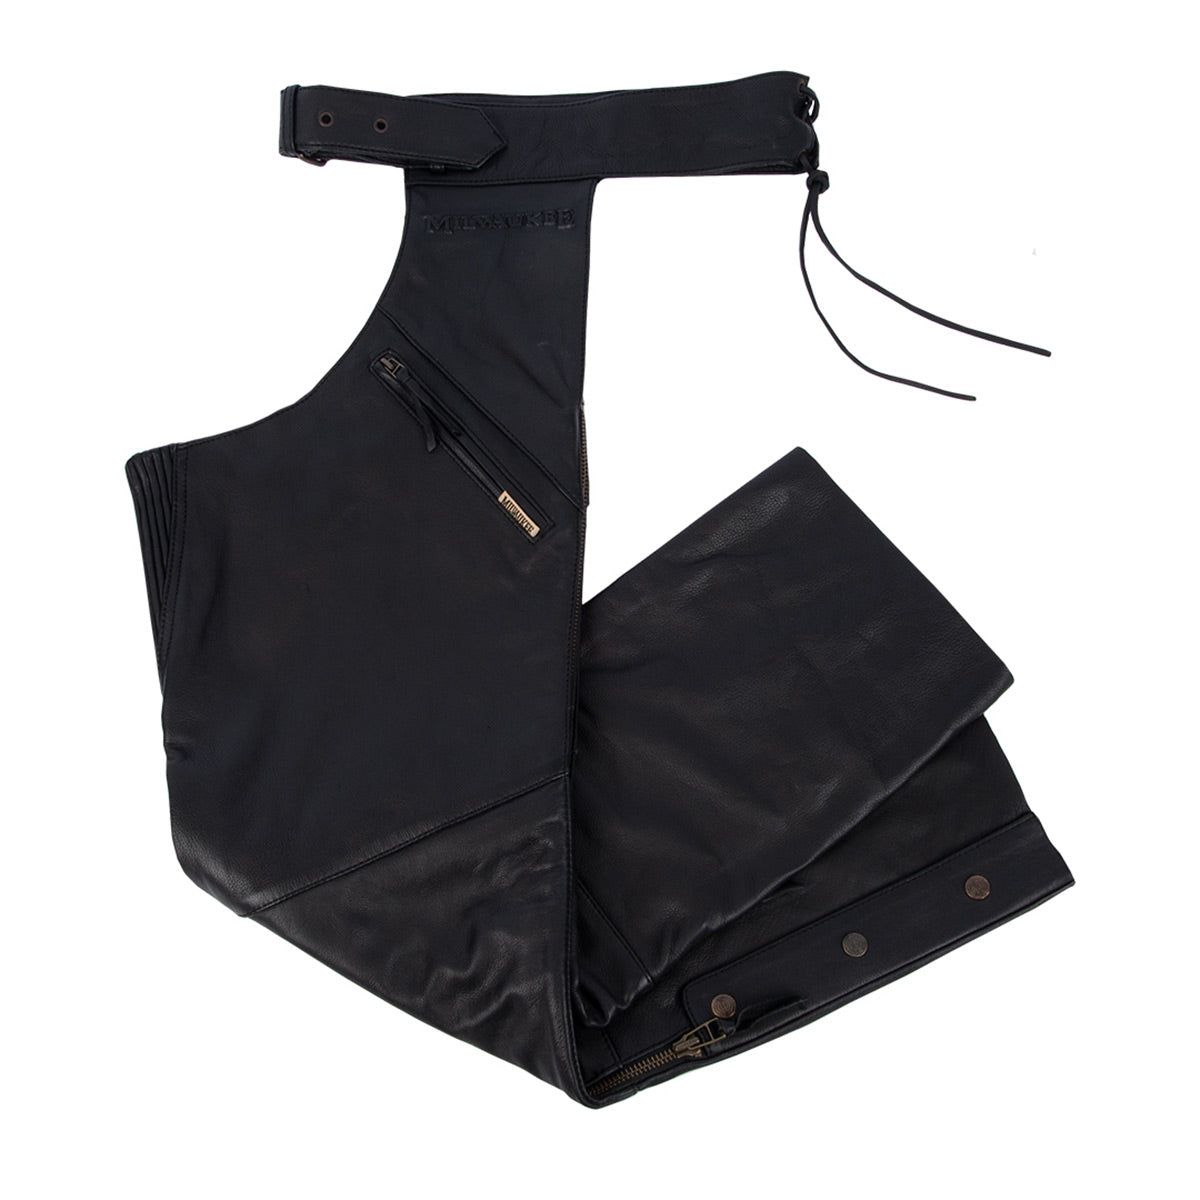 Milwaukee Leather Chaps for Men's Black Leather Slash Pocket- Snap Out